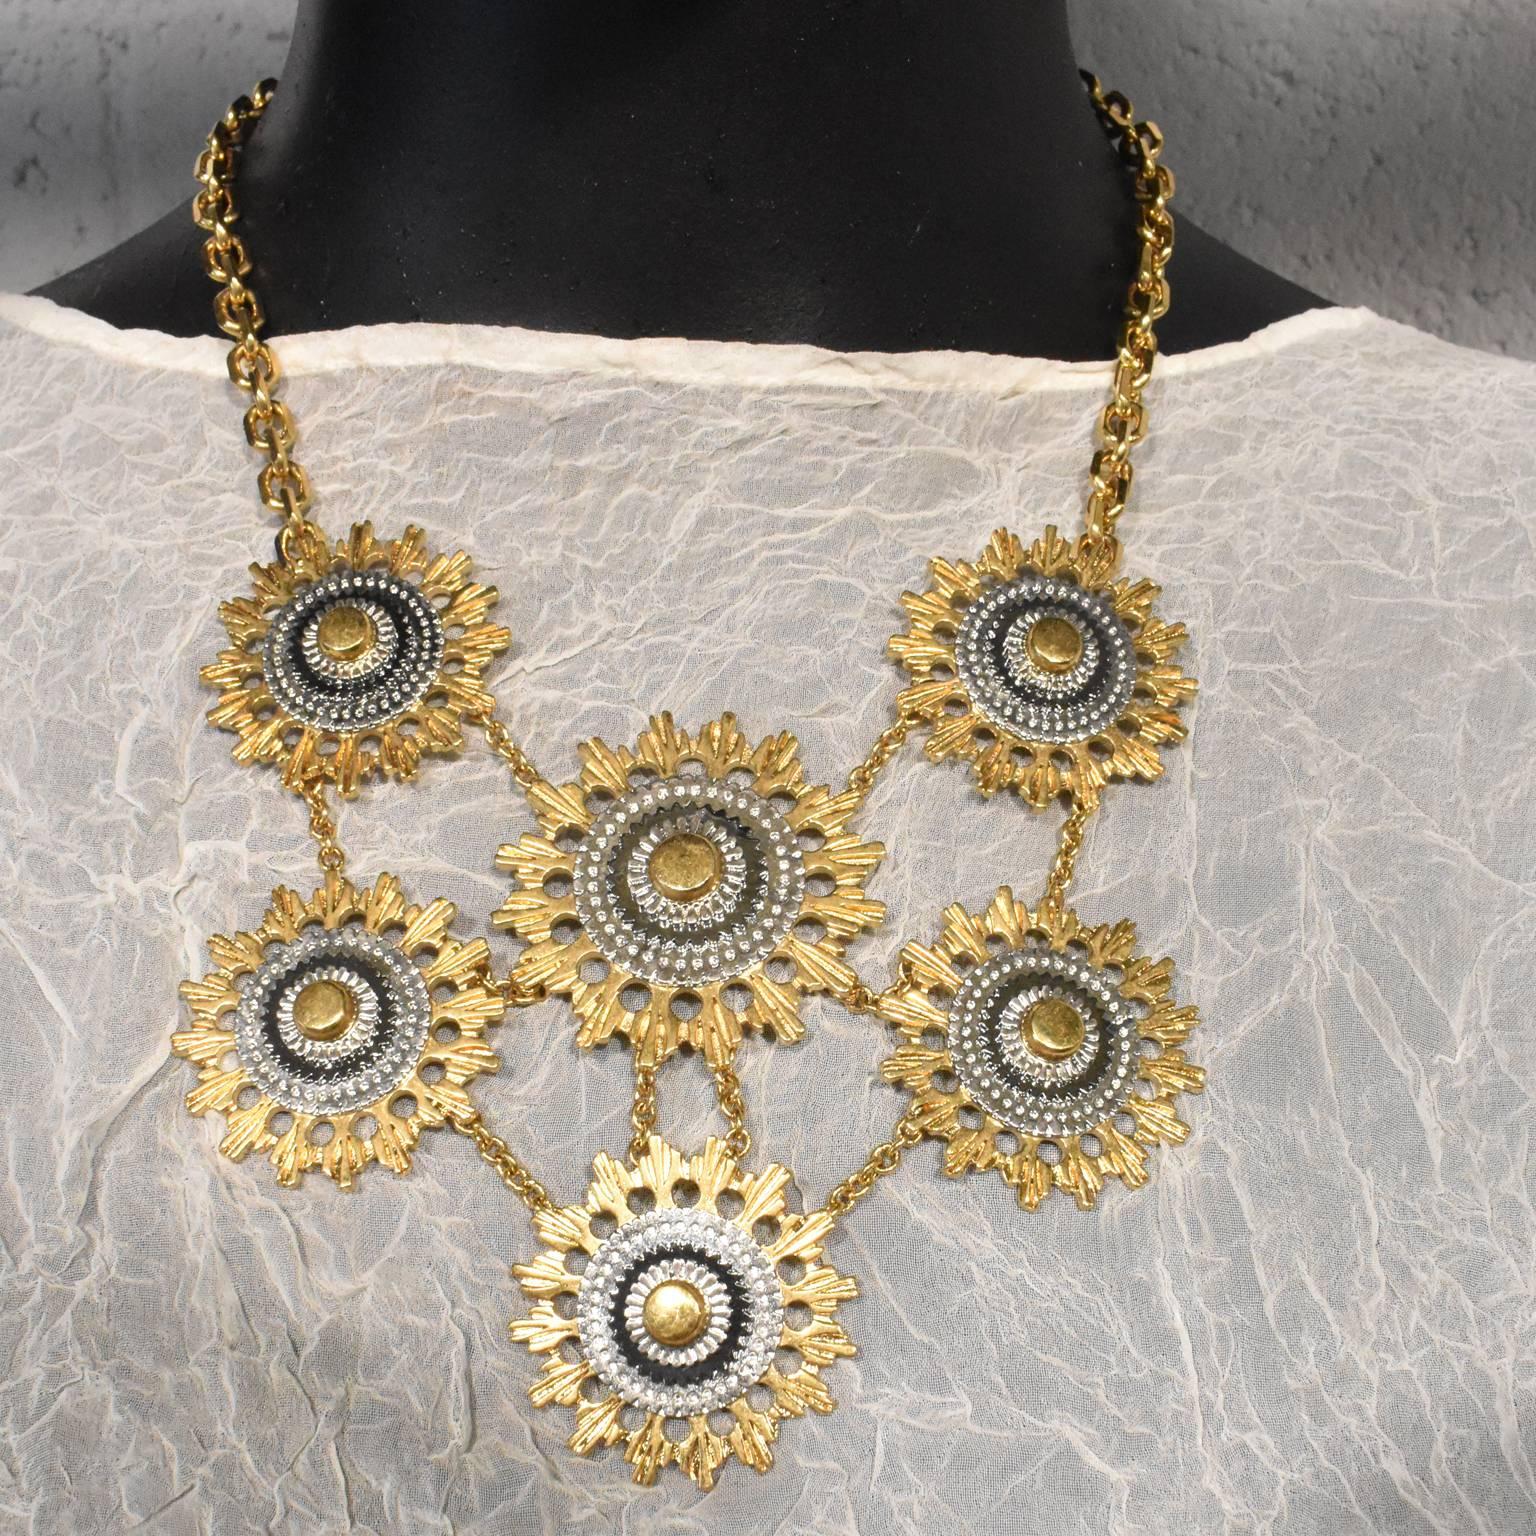 A stunning gold plated necklace from Alexander McQueen. The necklace is constructed from six abstract, mechanical sunbursts attached via gold chain. The pendants are attached to a chunky gold chain with a hook and two jump rings to adjust for